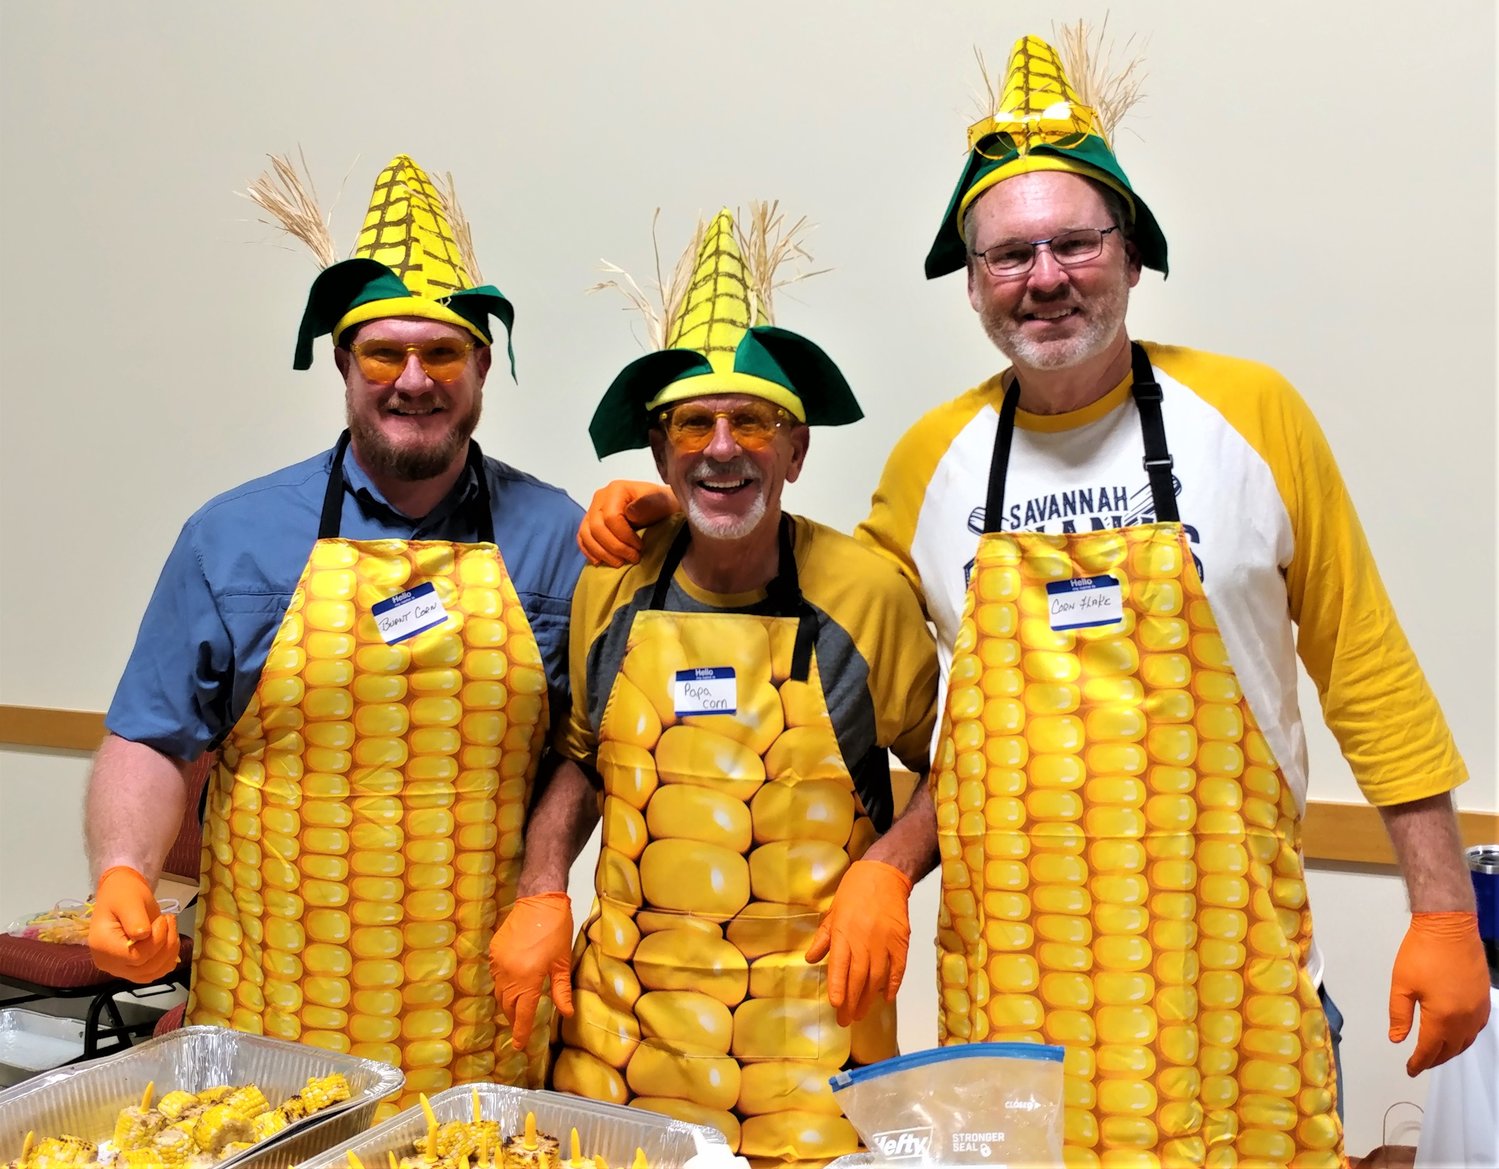 Dressed as corn on the cob, Chad Getz, Rick Jackson, Mike Tourtillott and Tony Lujan (not pictured) won the Presentation award at Men Who Cook.